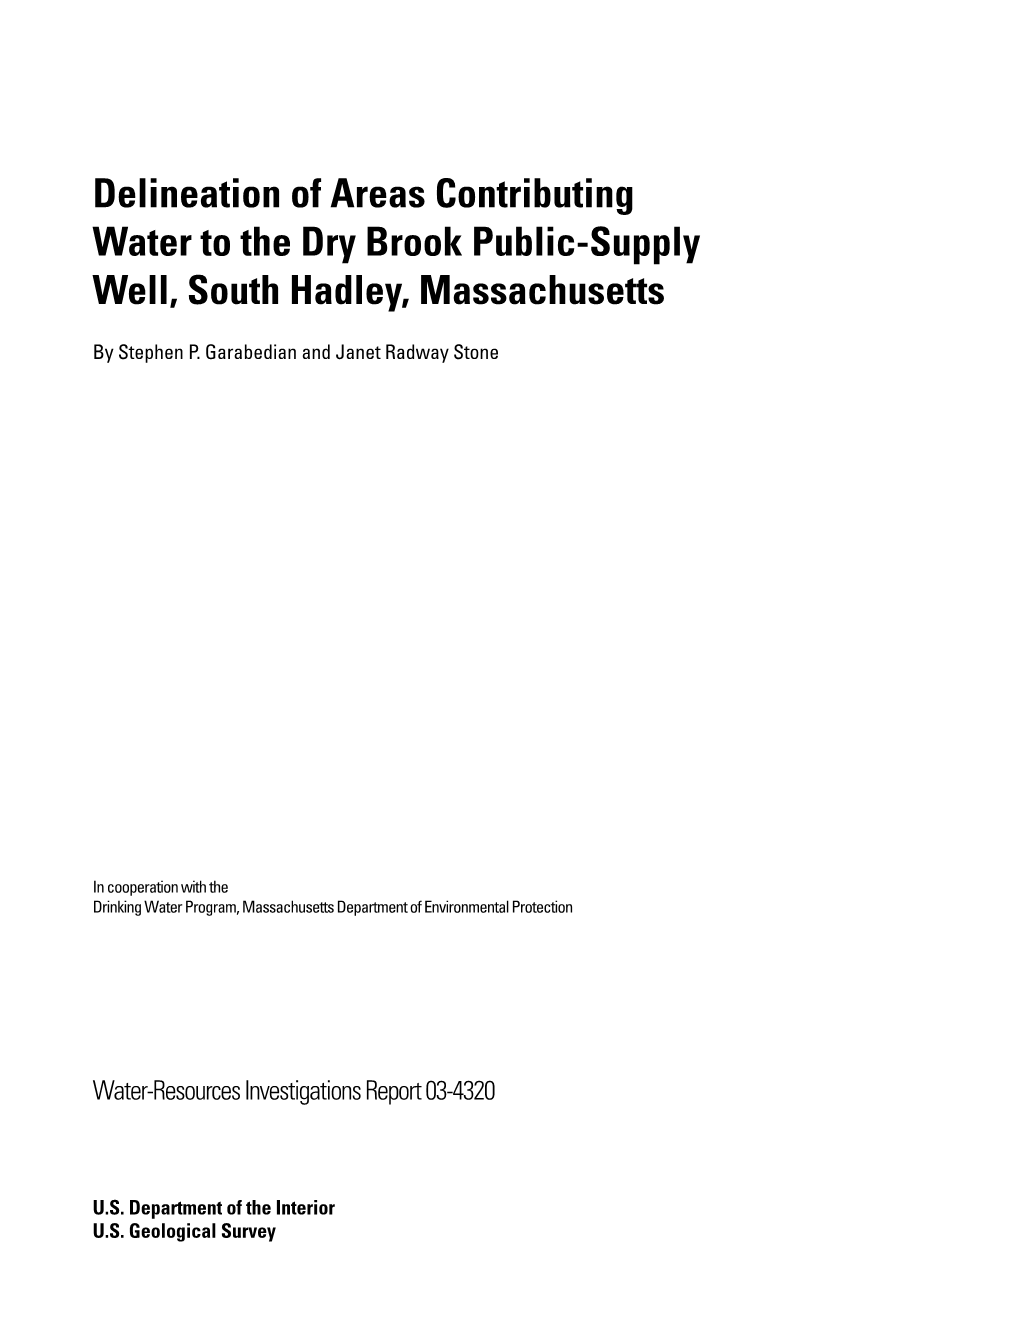 Delineation of Areas Contributing Water to the Dry Brook Public-Supply Well, South Hadley, Massachusetts